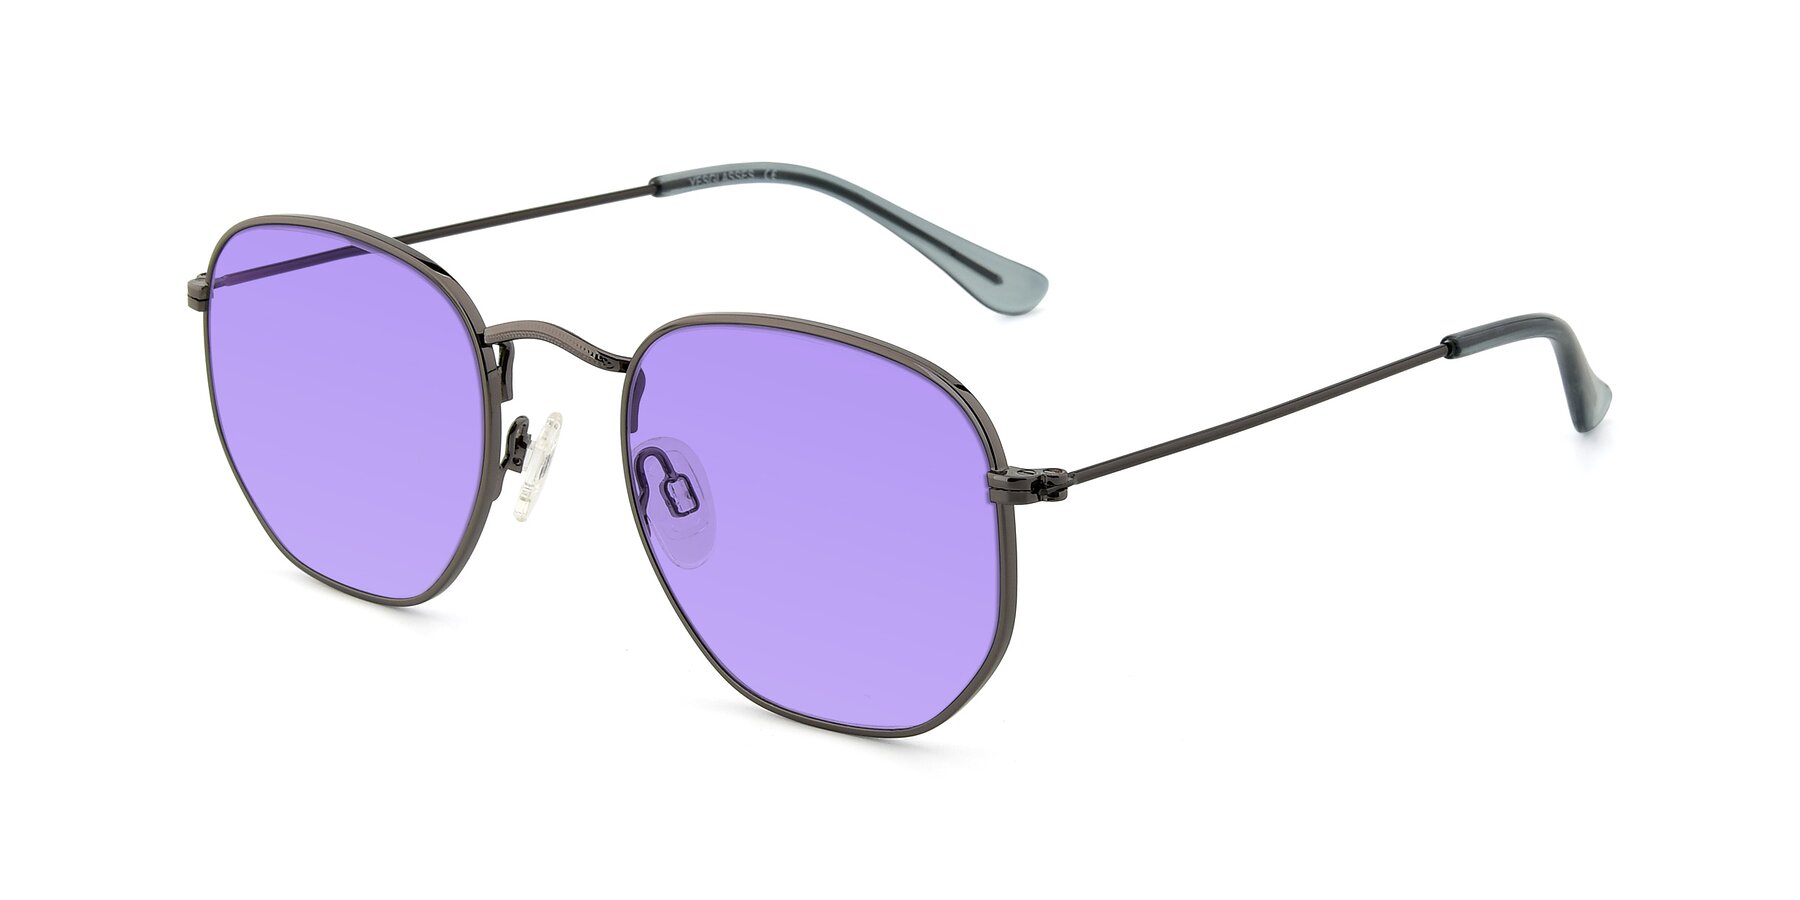 Angle of SSR1943 in Grey with Medium Purple Tinted Lenses